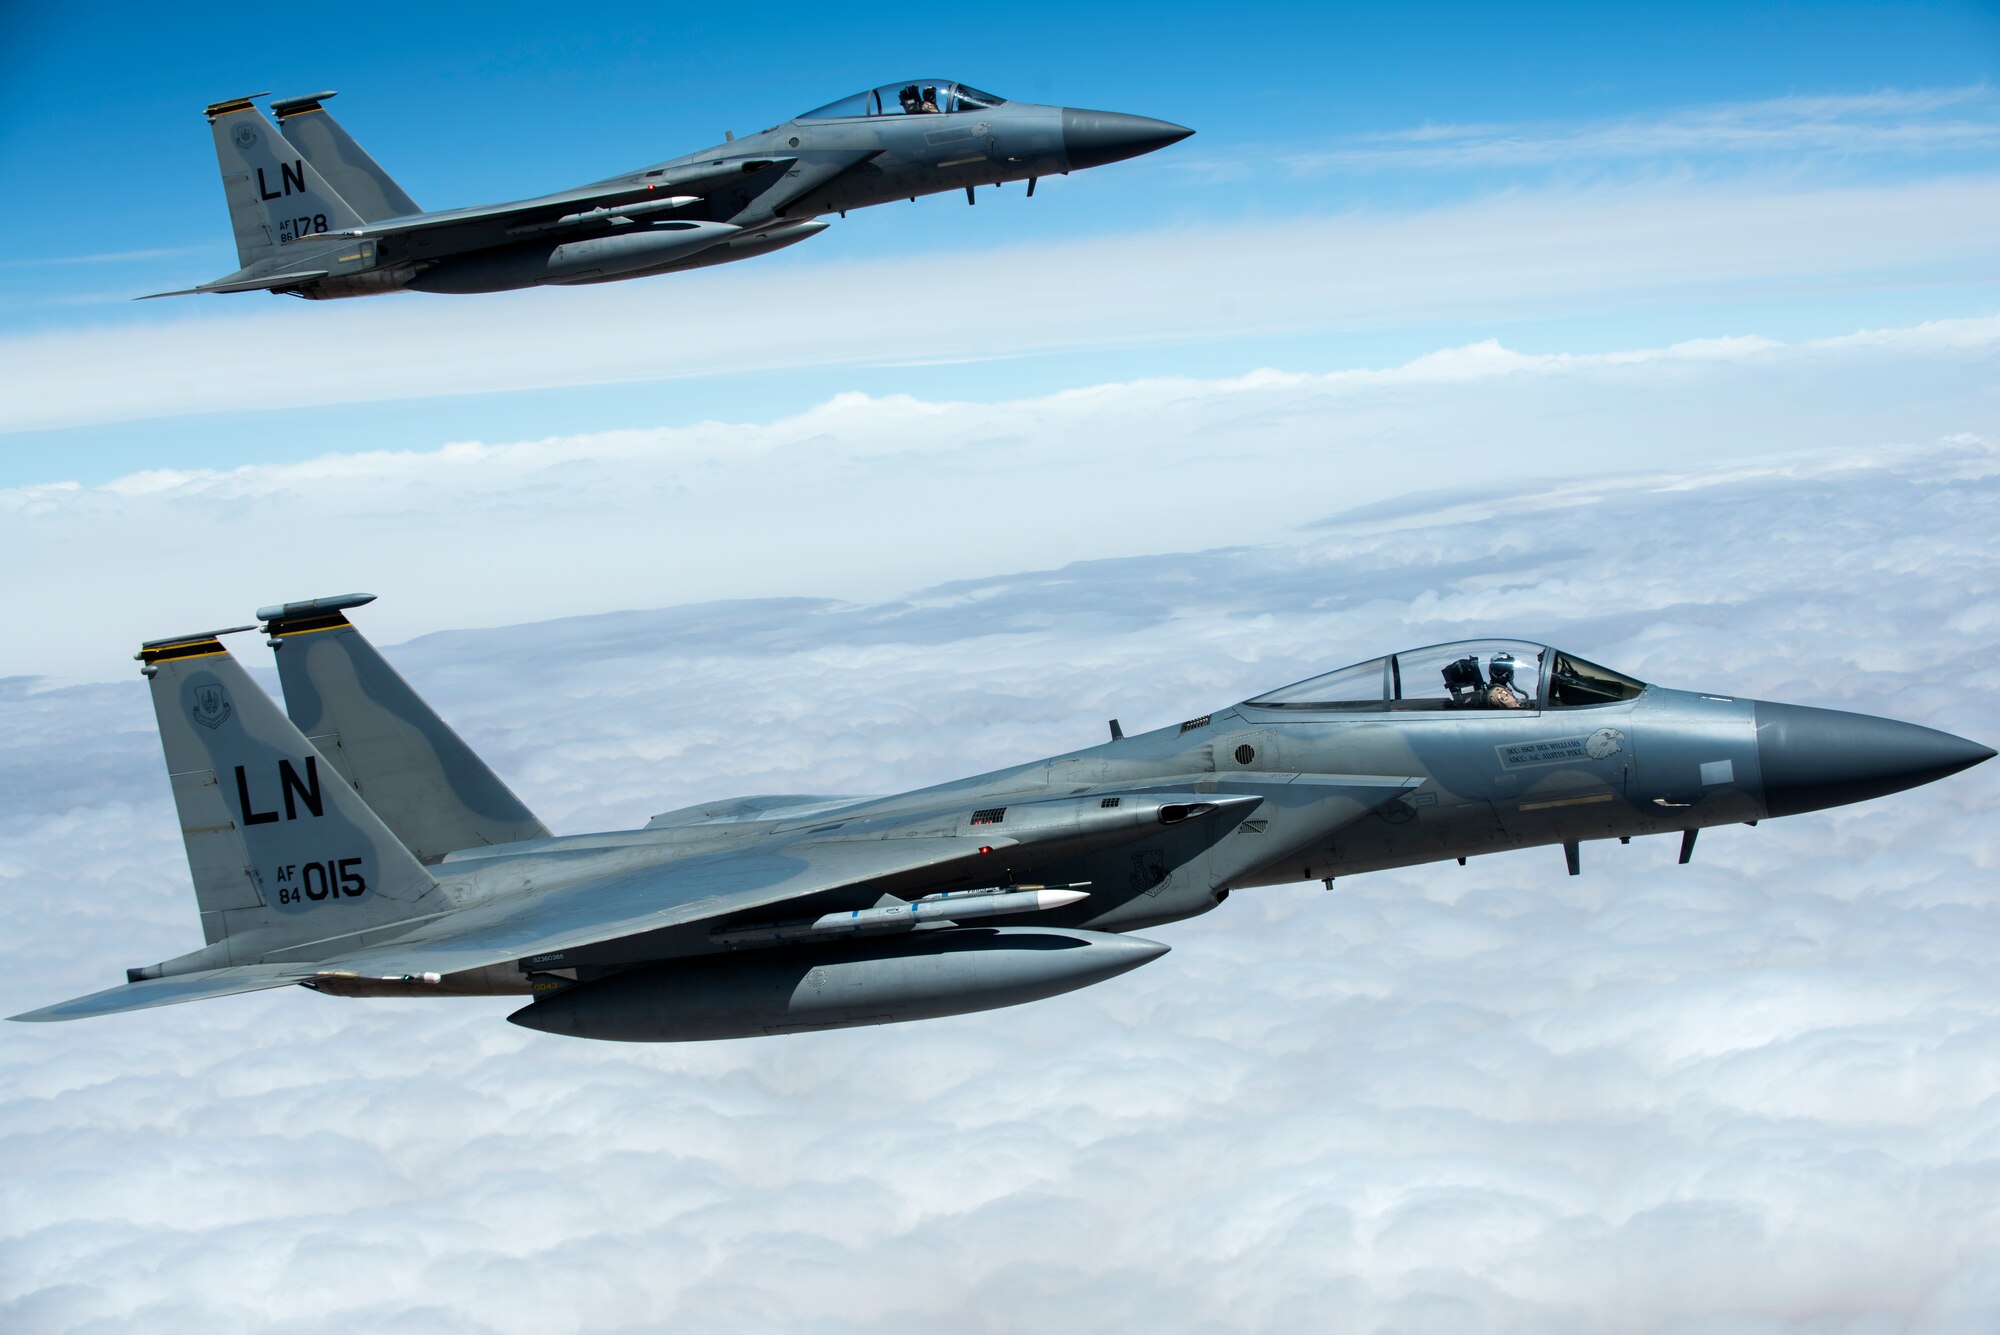 A formation of F-15C Eagles assigned to the 493rd Fighter Squadron flies over Morocco during Exercise African Lion April 20, 2018. Various units from the U.S. Armed Forces will conduct multilateral and stability operations training with units from the Royal Moroccan Armed Forces in the Kingdom of Morocco. This combined multilateral exercise is designed to improve interoperability and mutual understanding of each nation’s tactics, techniques and procedures while demonstrating the strong bond between the nation’s militaries. (U.S. Air Force photo/Senior Airman Malcolm Mayfield)